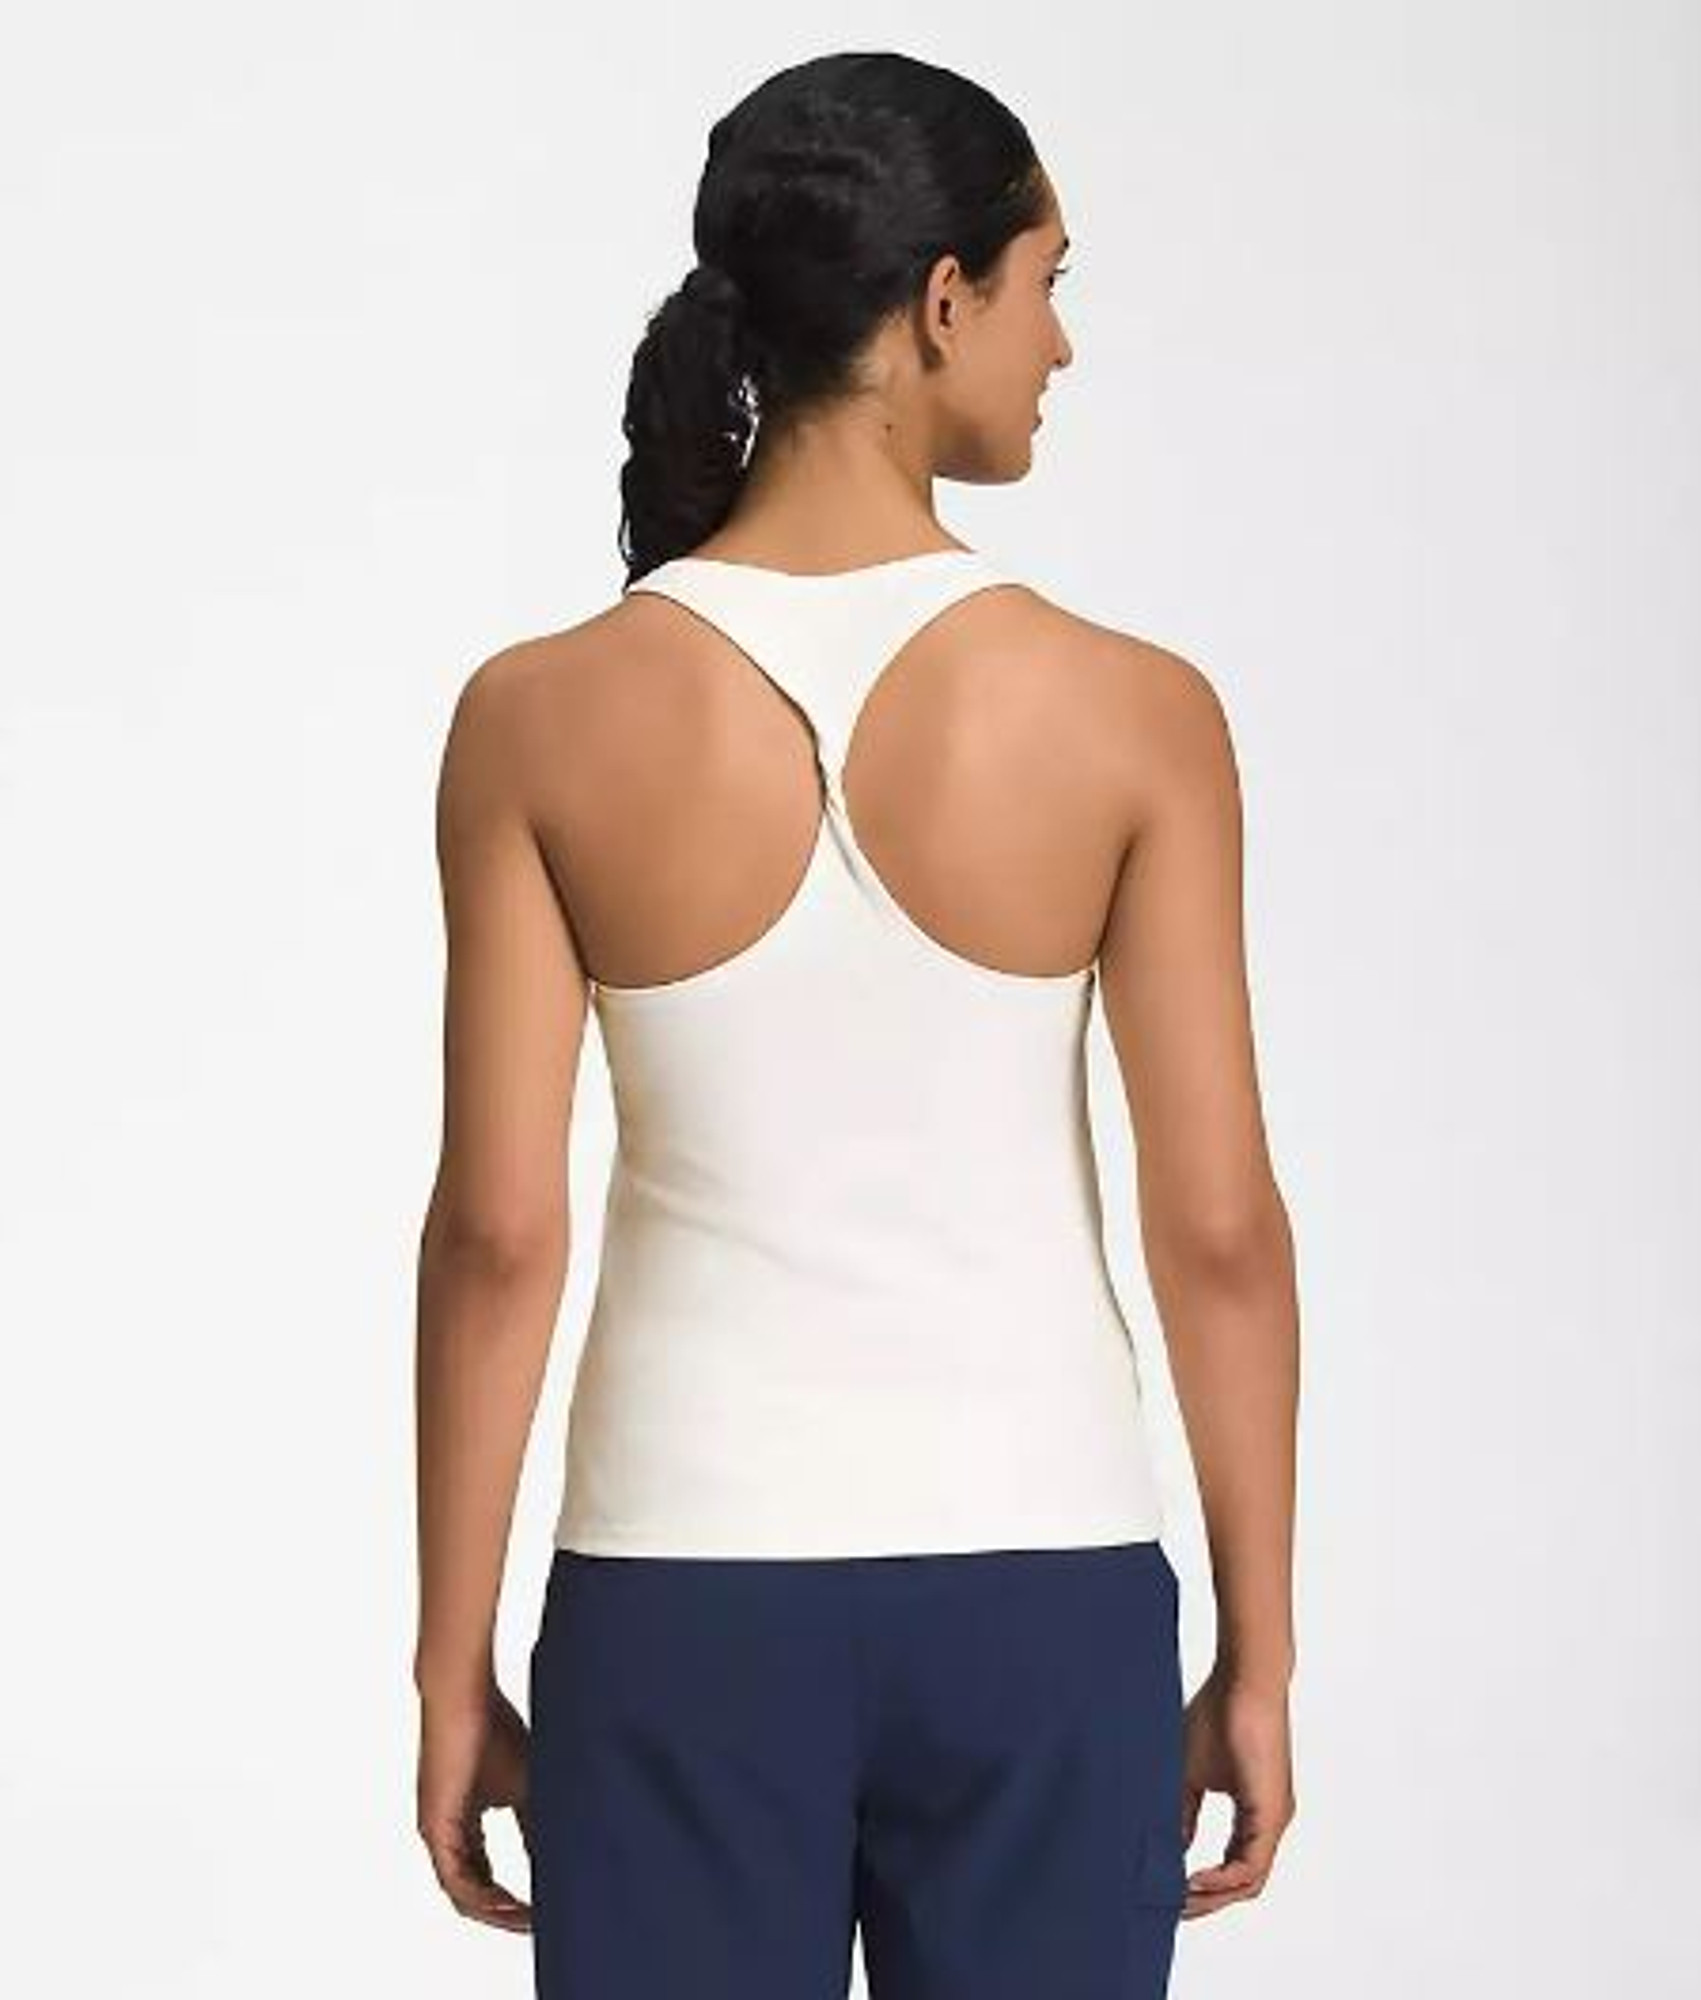 The North Face Women's Dune Sky Tank - High Mountain Sports